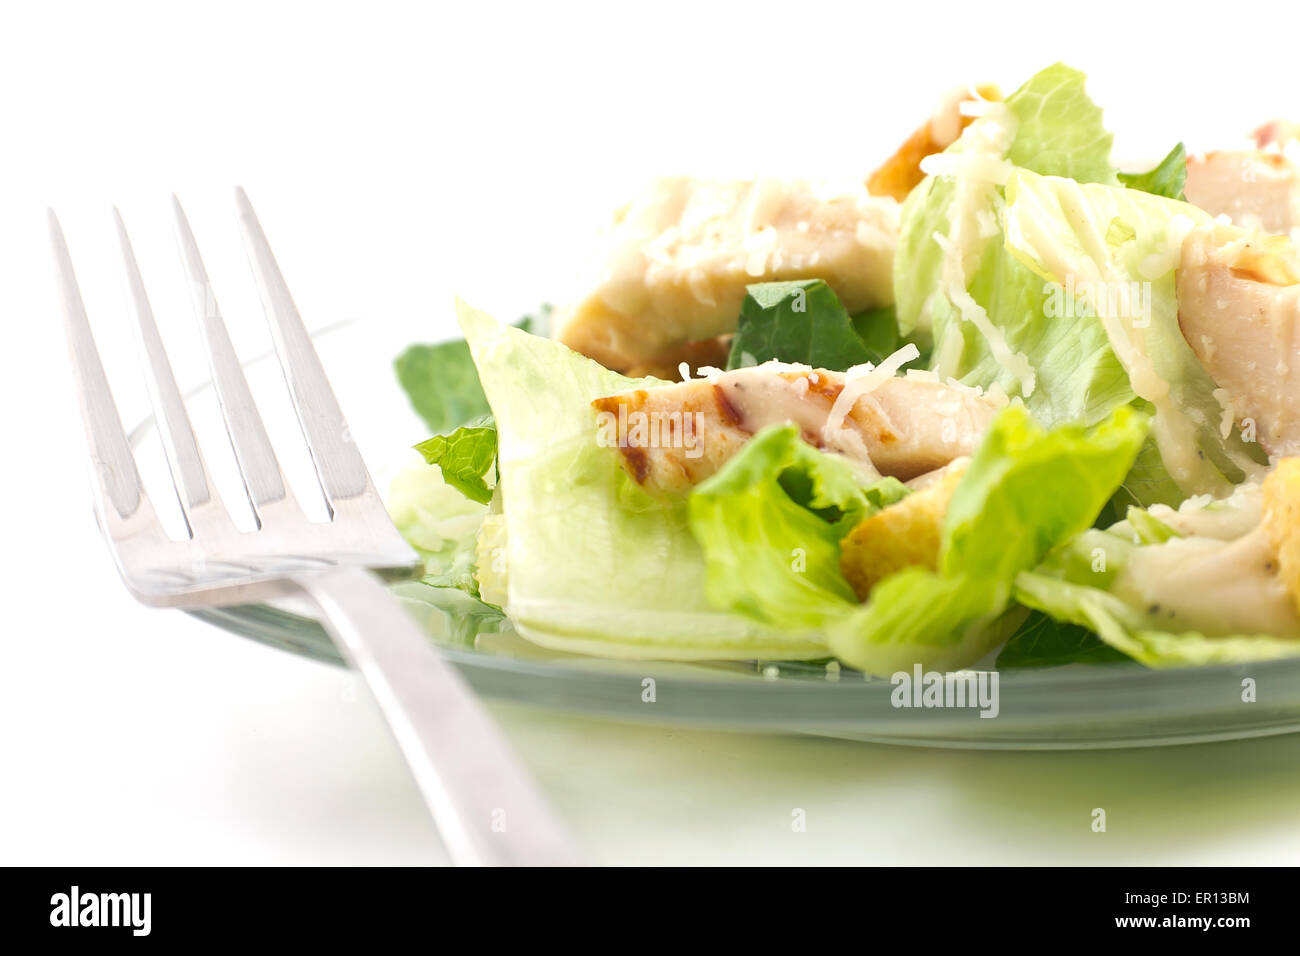 Chicken Caesar salad isolated on a white background with crutons and thick creamy dressing Stock Photo